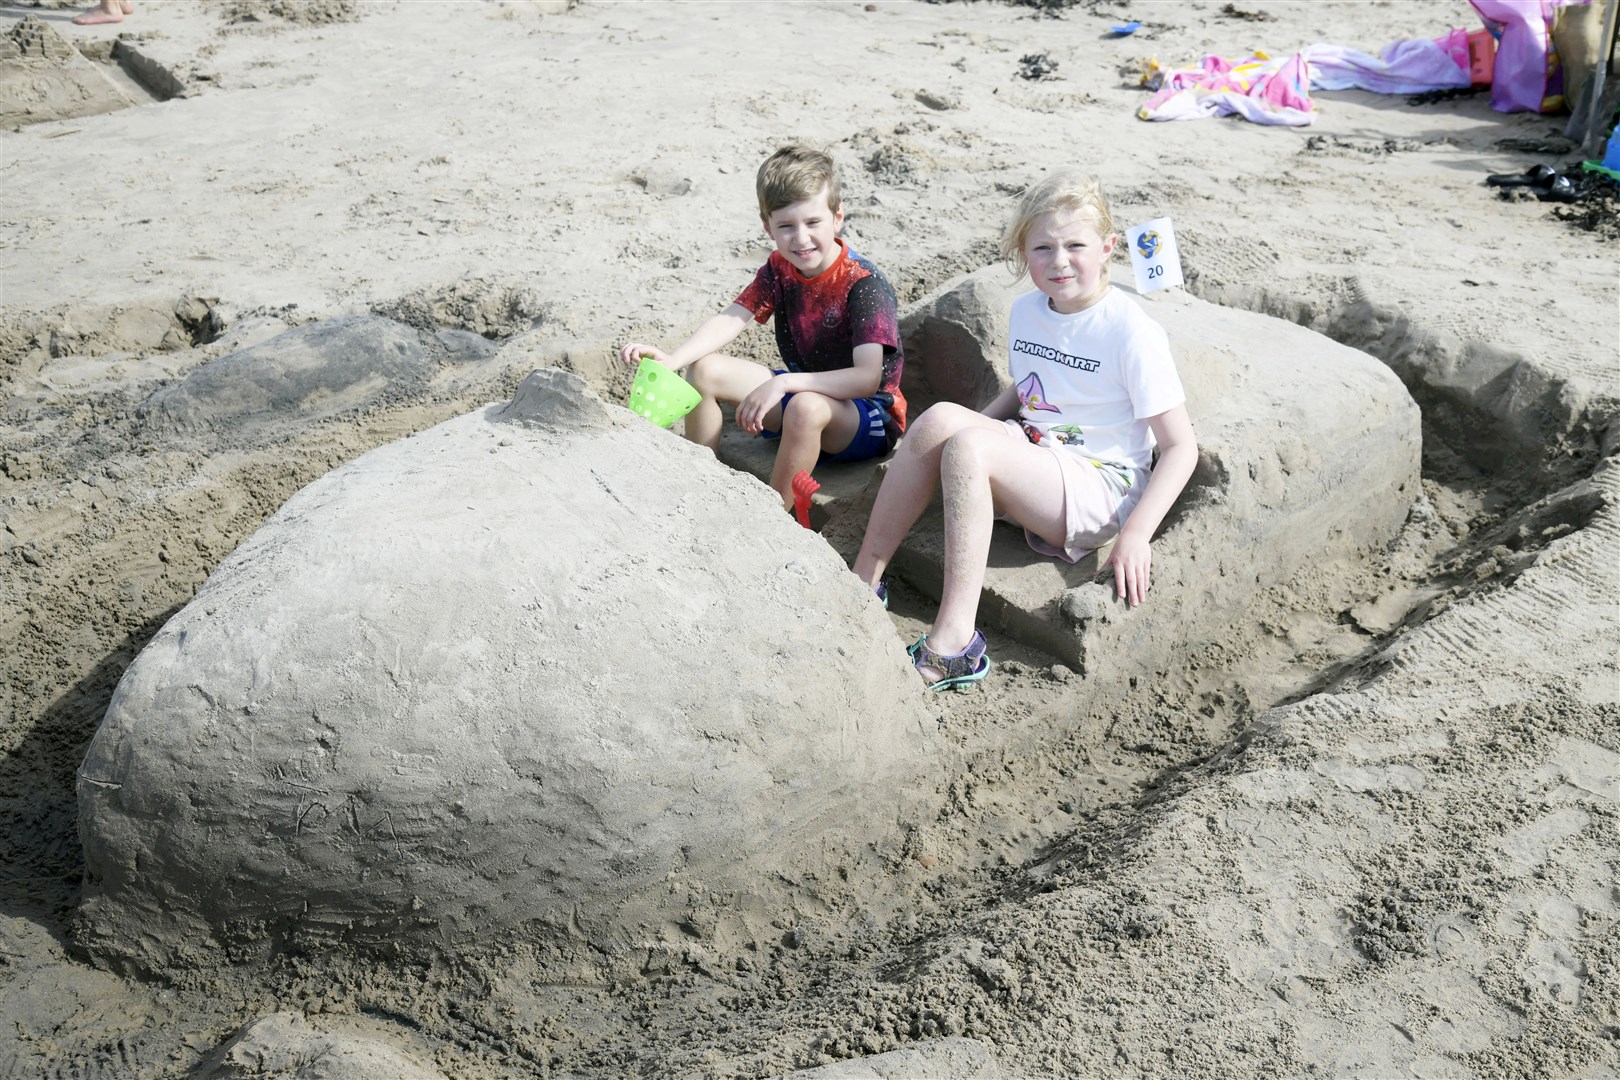 Tom Lewis (left) and Rosalind MacLeod (right) modelling their boat sandcastle at Seafest. Picture: Beth Taylor